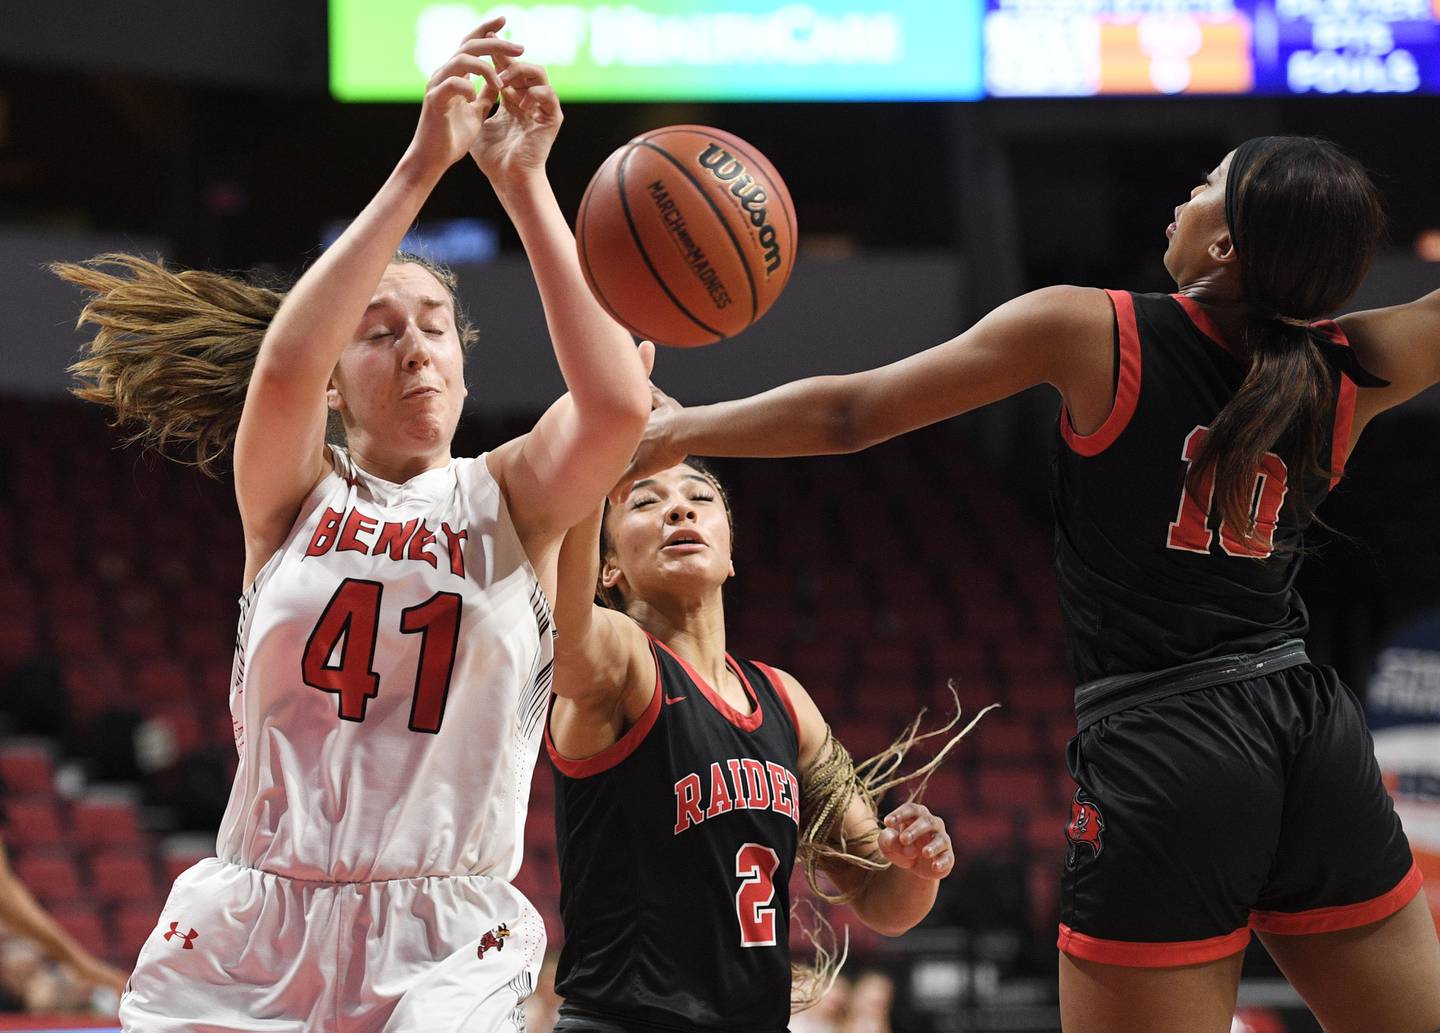 Benet Academy’s Morgan Demos and Bolingbrook's Miranda Fry and Tatiana Thomas, middle, compete for the ball in the Class 4A state 3rd place game at Redbird Arena at Illinois State University in Normal on Friday, March 4, 2022.